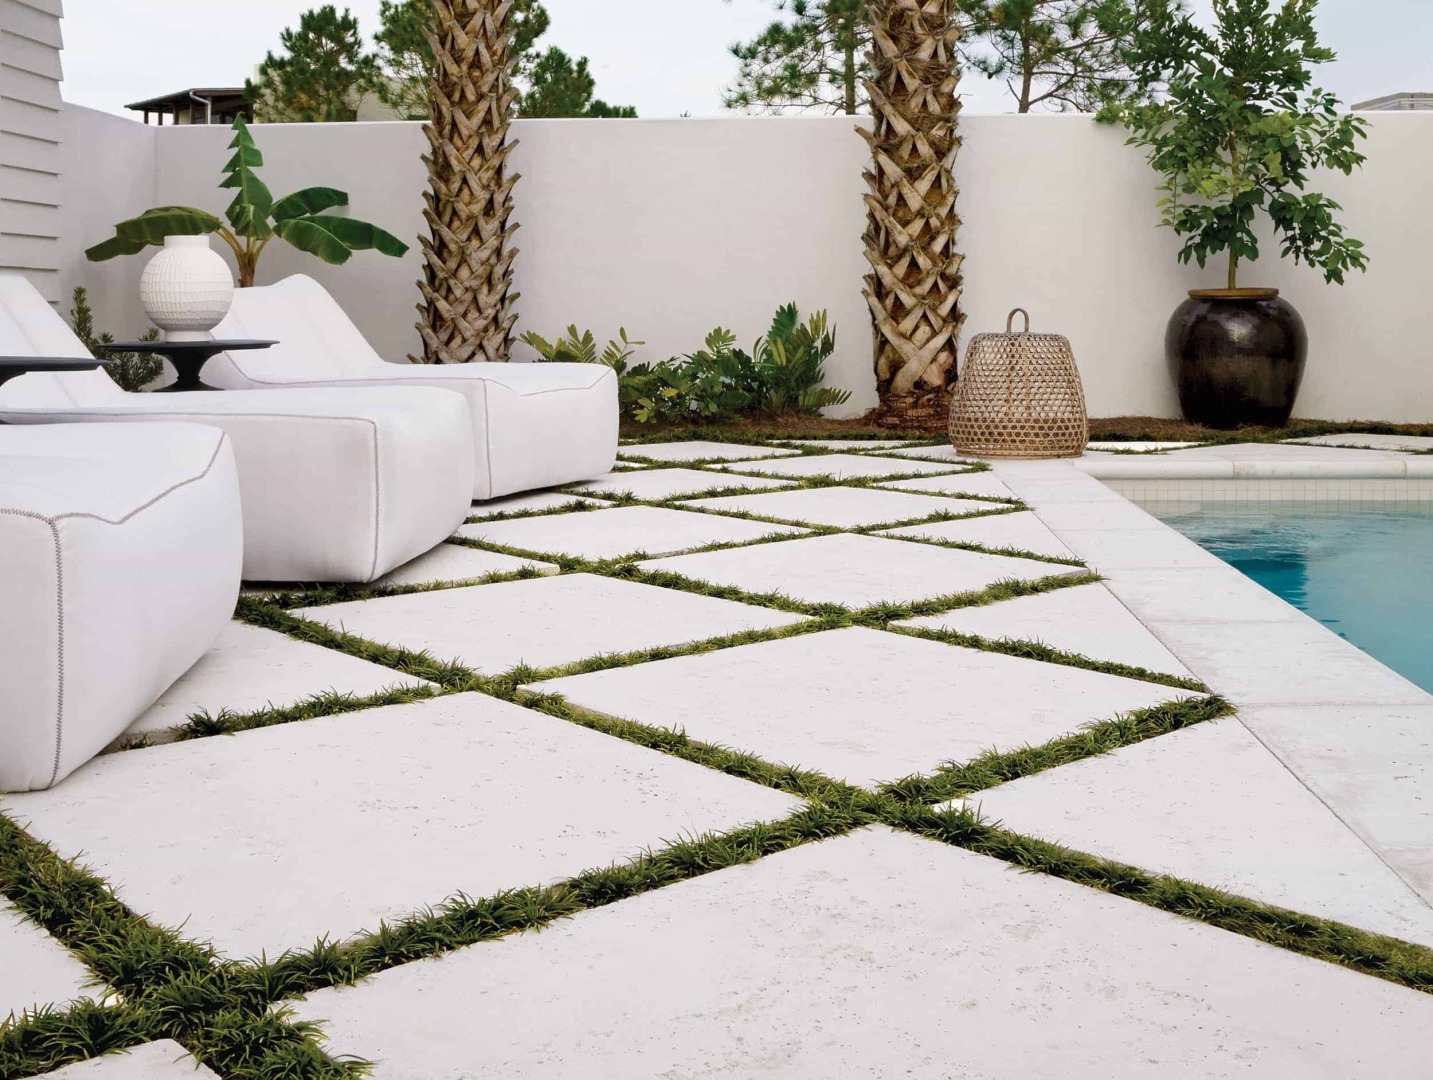 Revamp Your Backyard with Custom Concrete Square Pavers